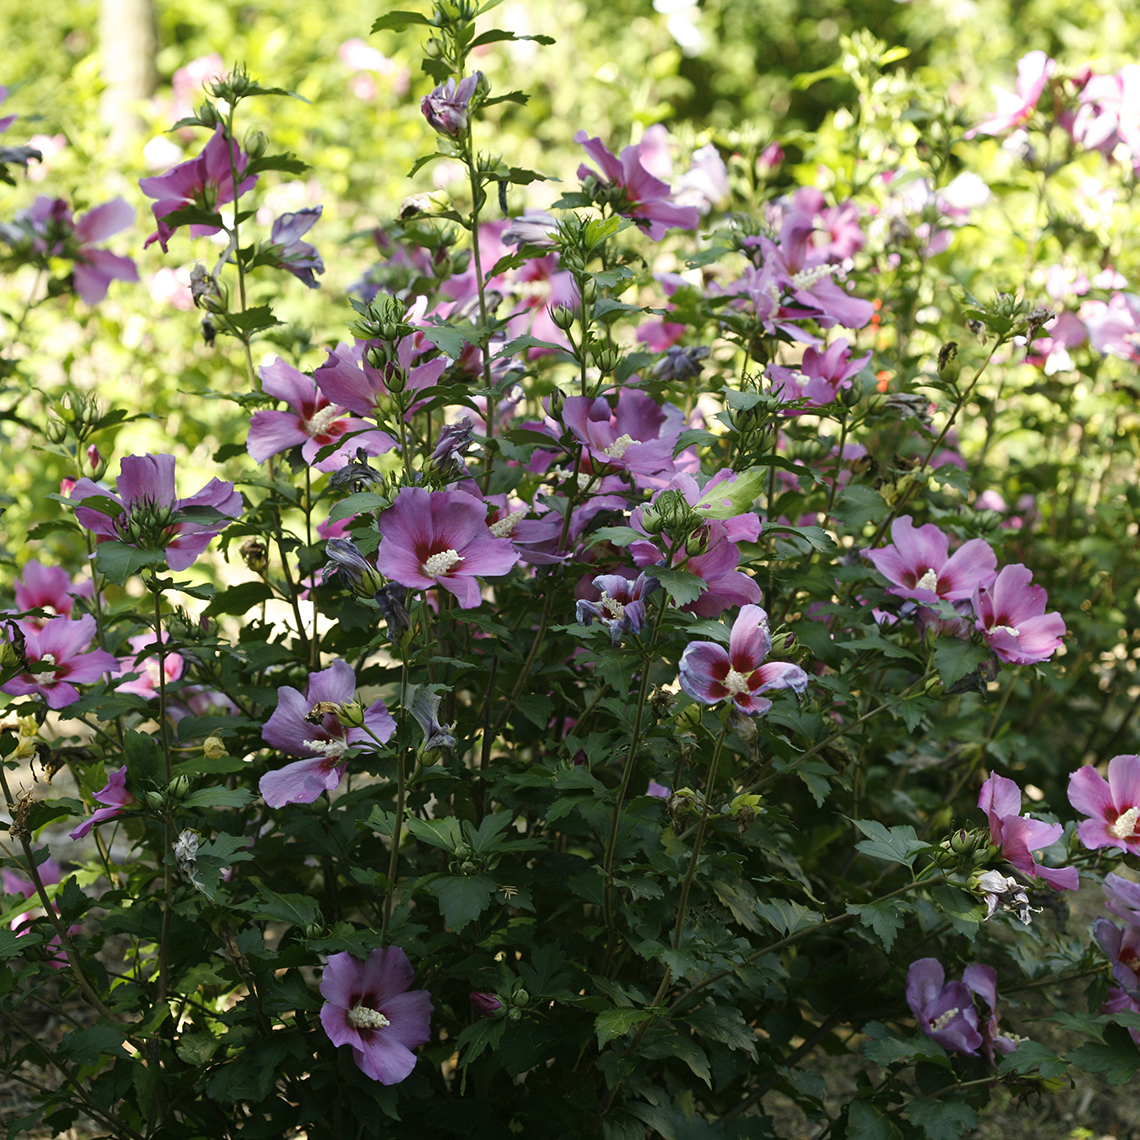 Purple Satin Hibiscus blooming in the landscape